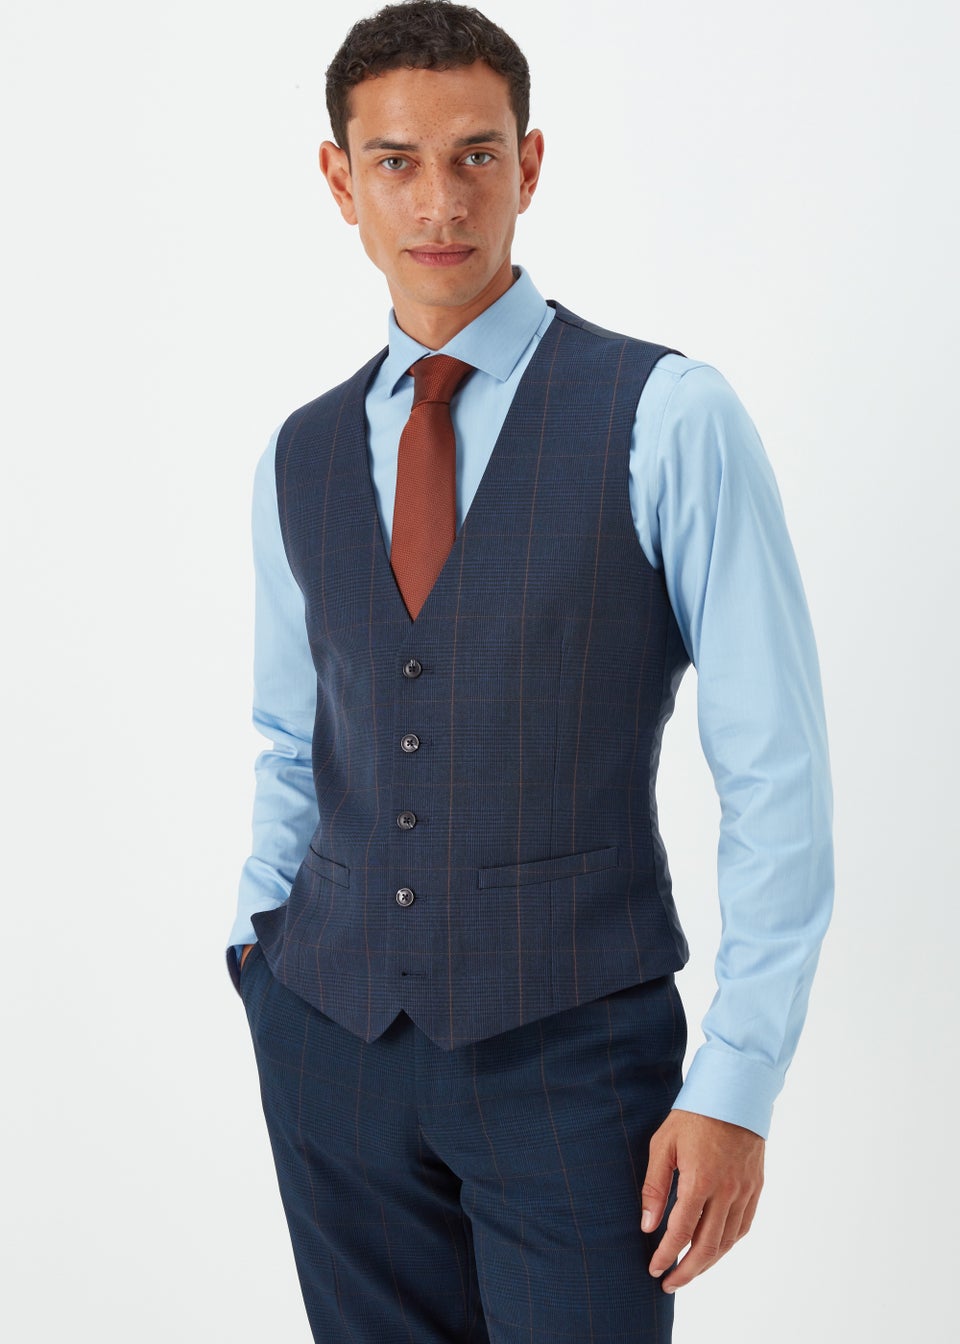 Taylor & Wright Westminster Navy Suit Waistcoat